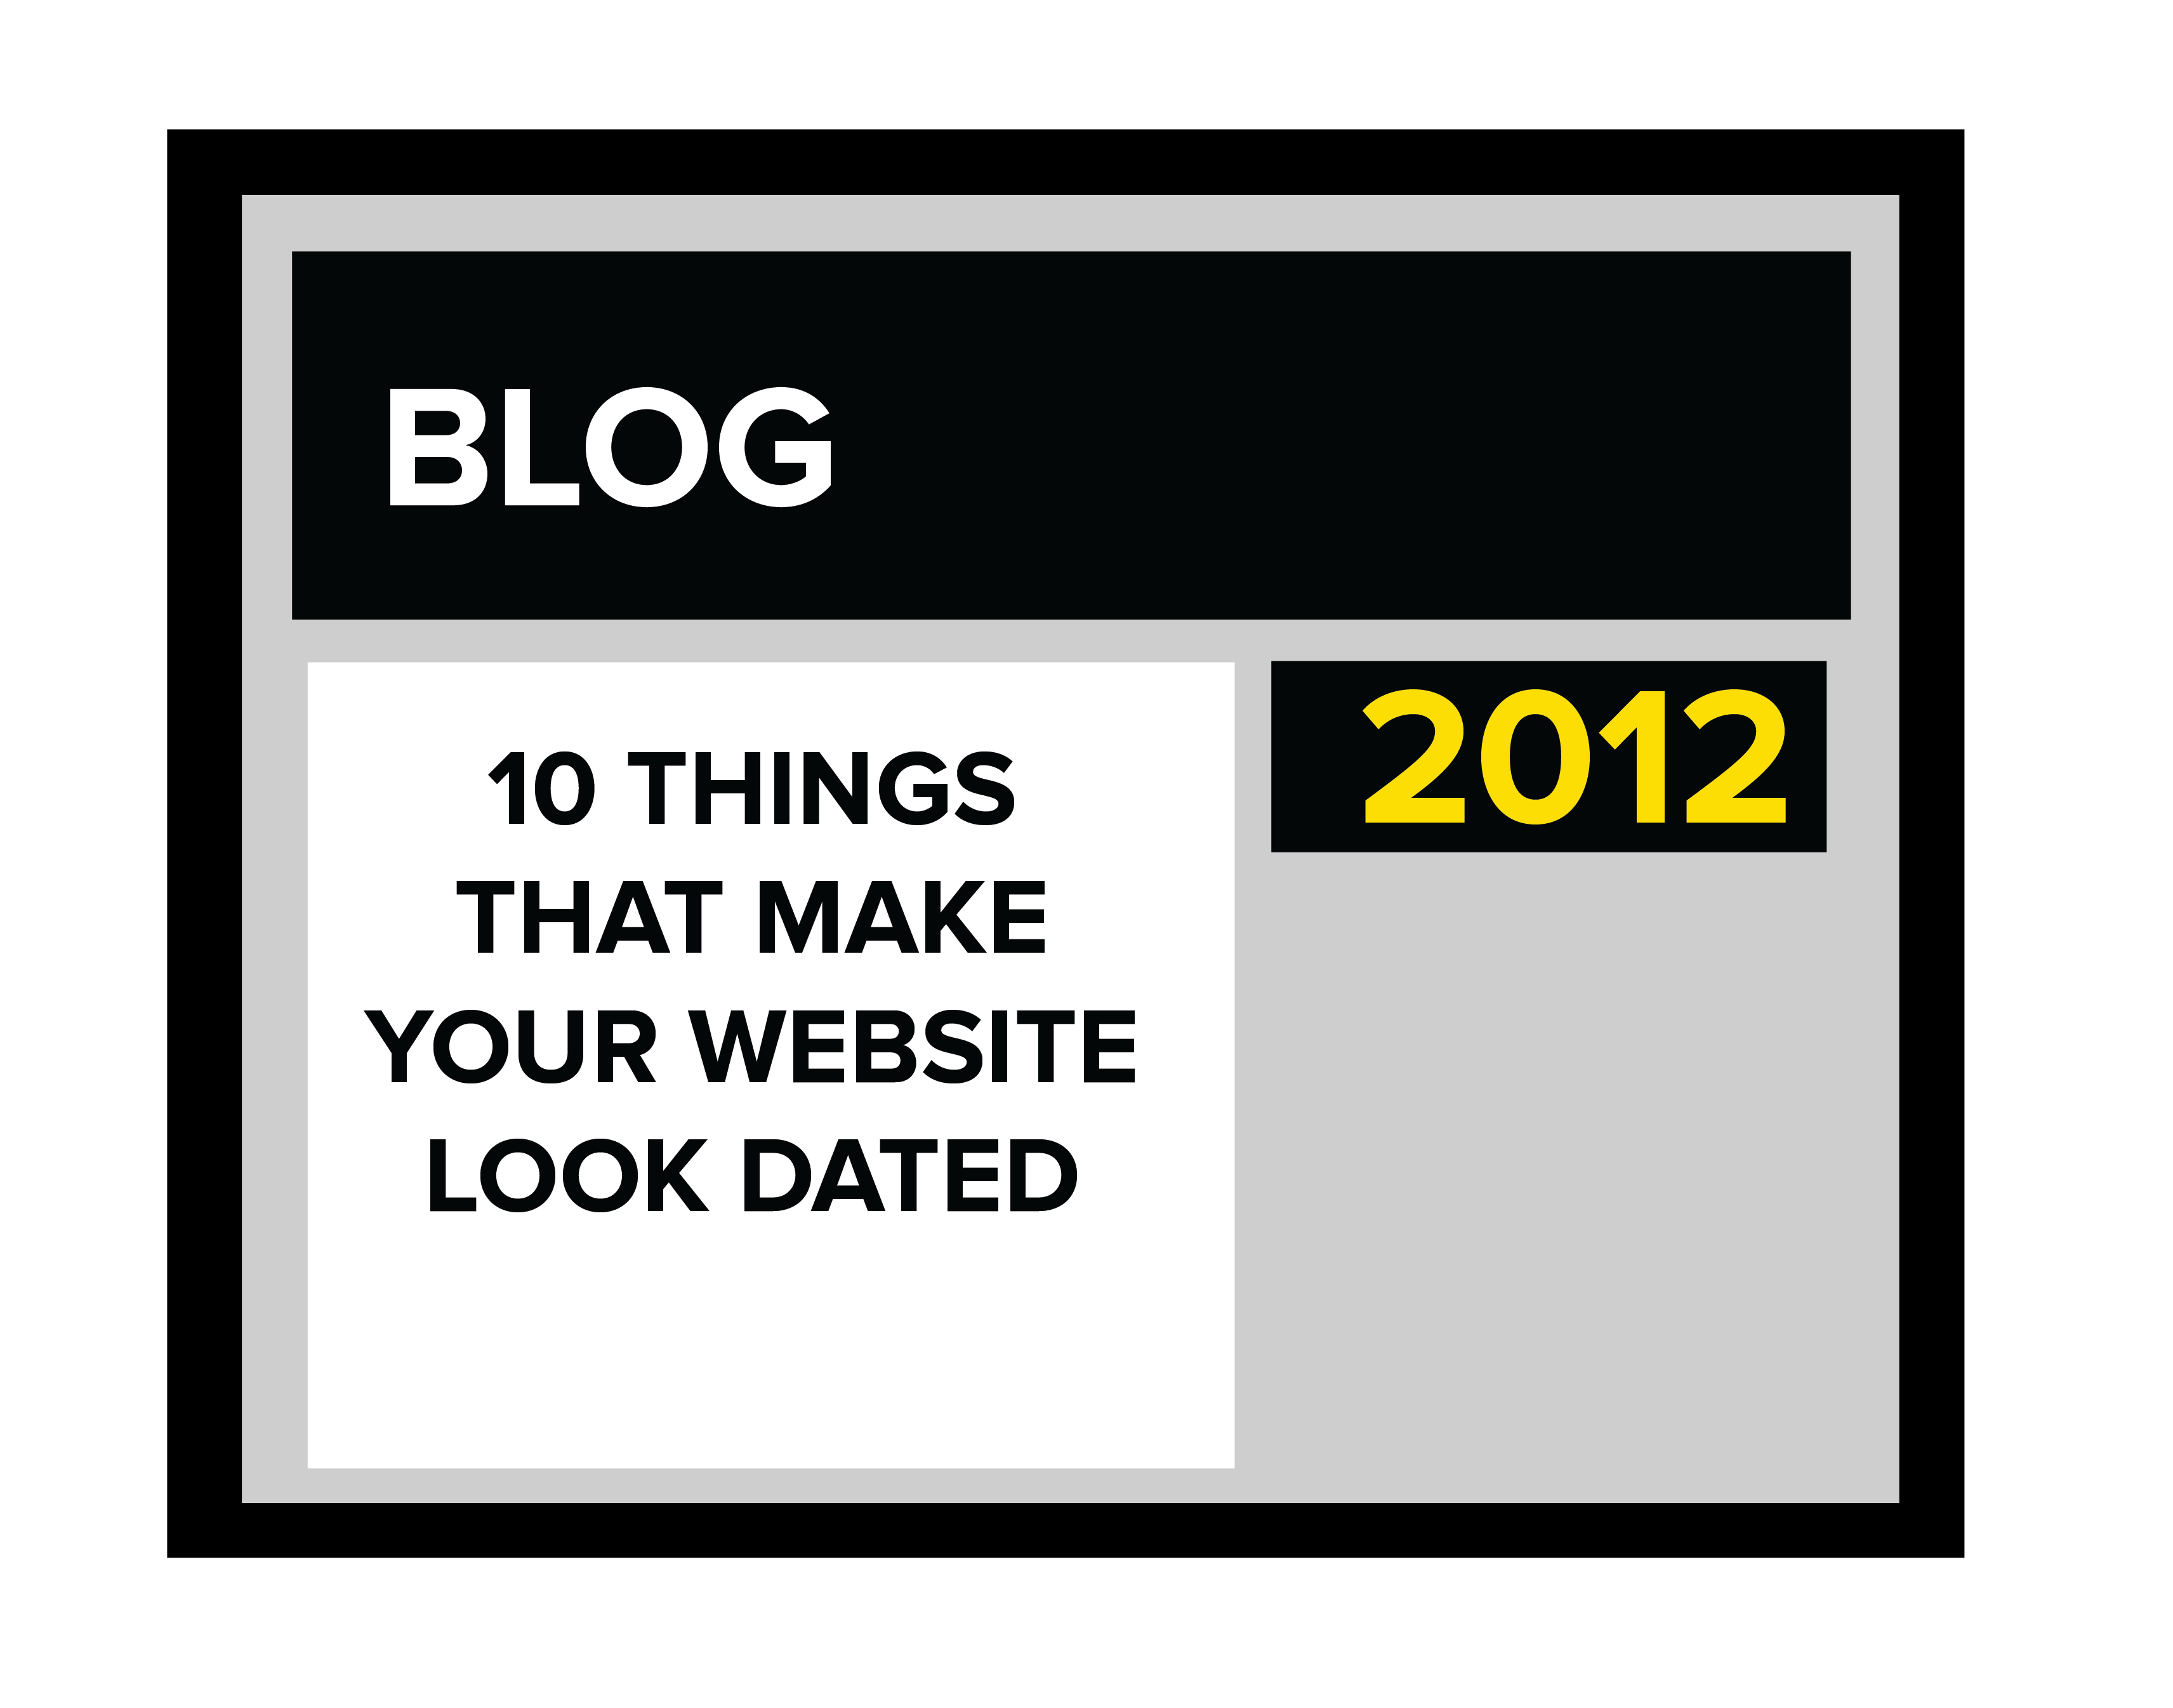 09 - Outdated Blogs & News